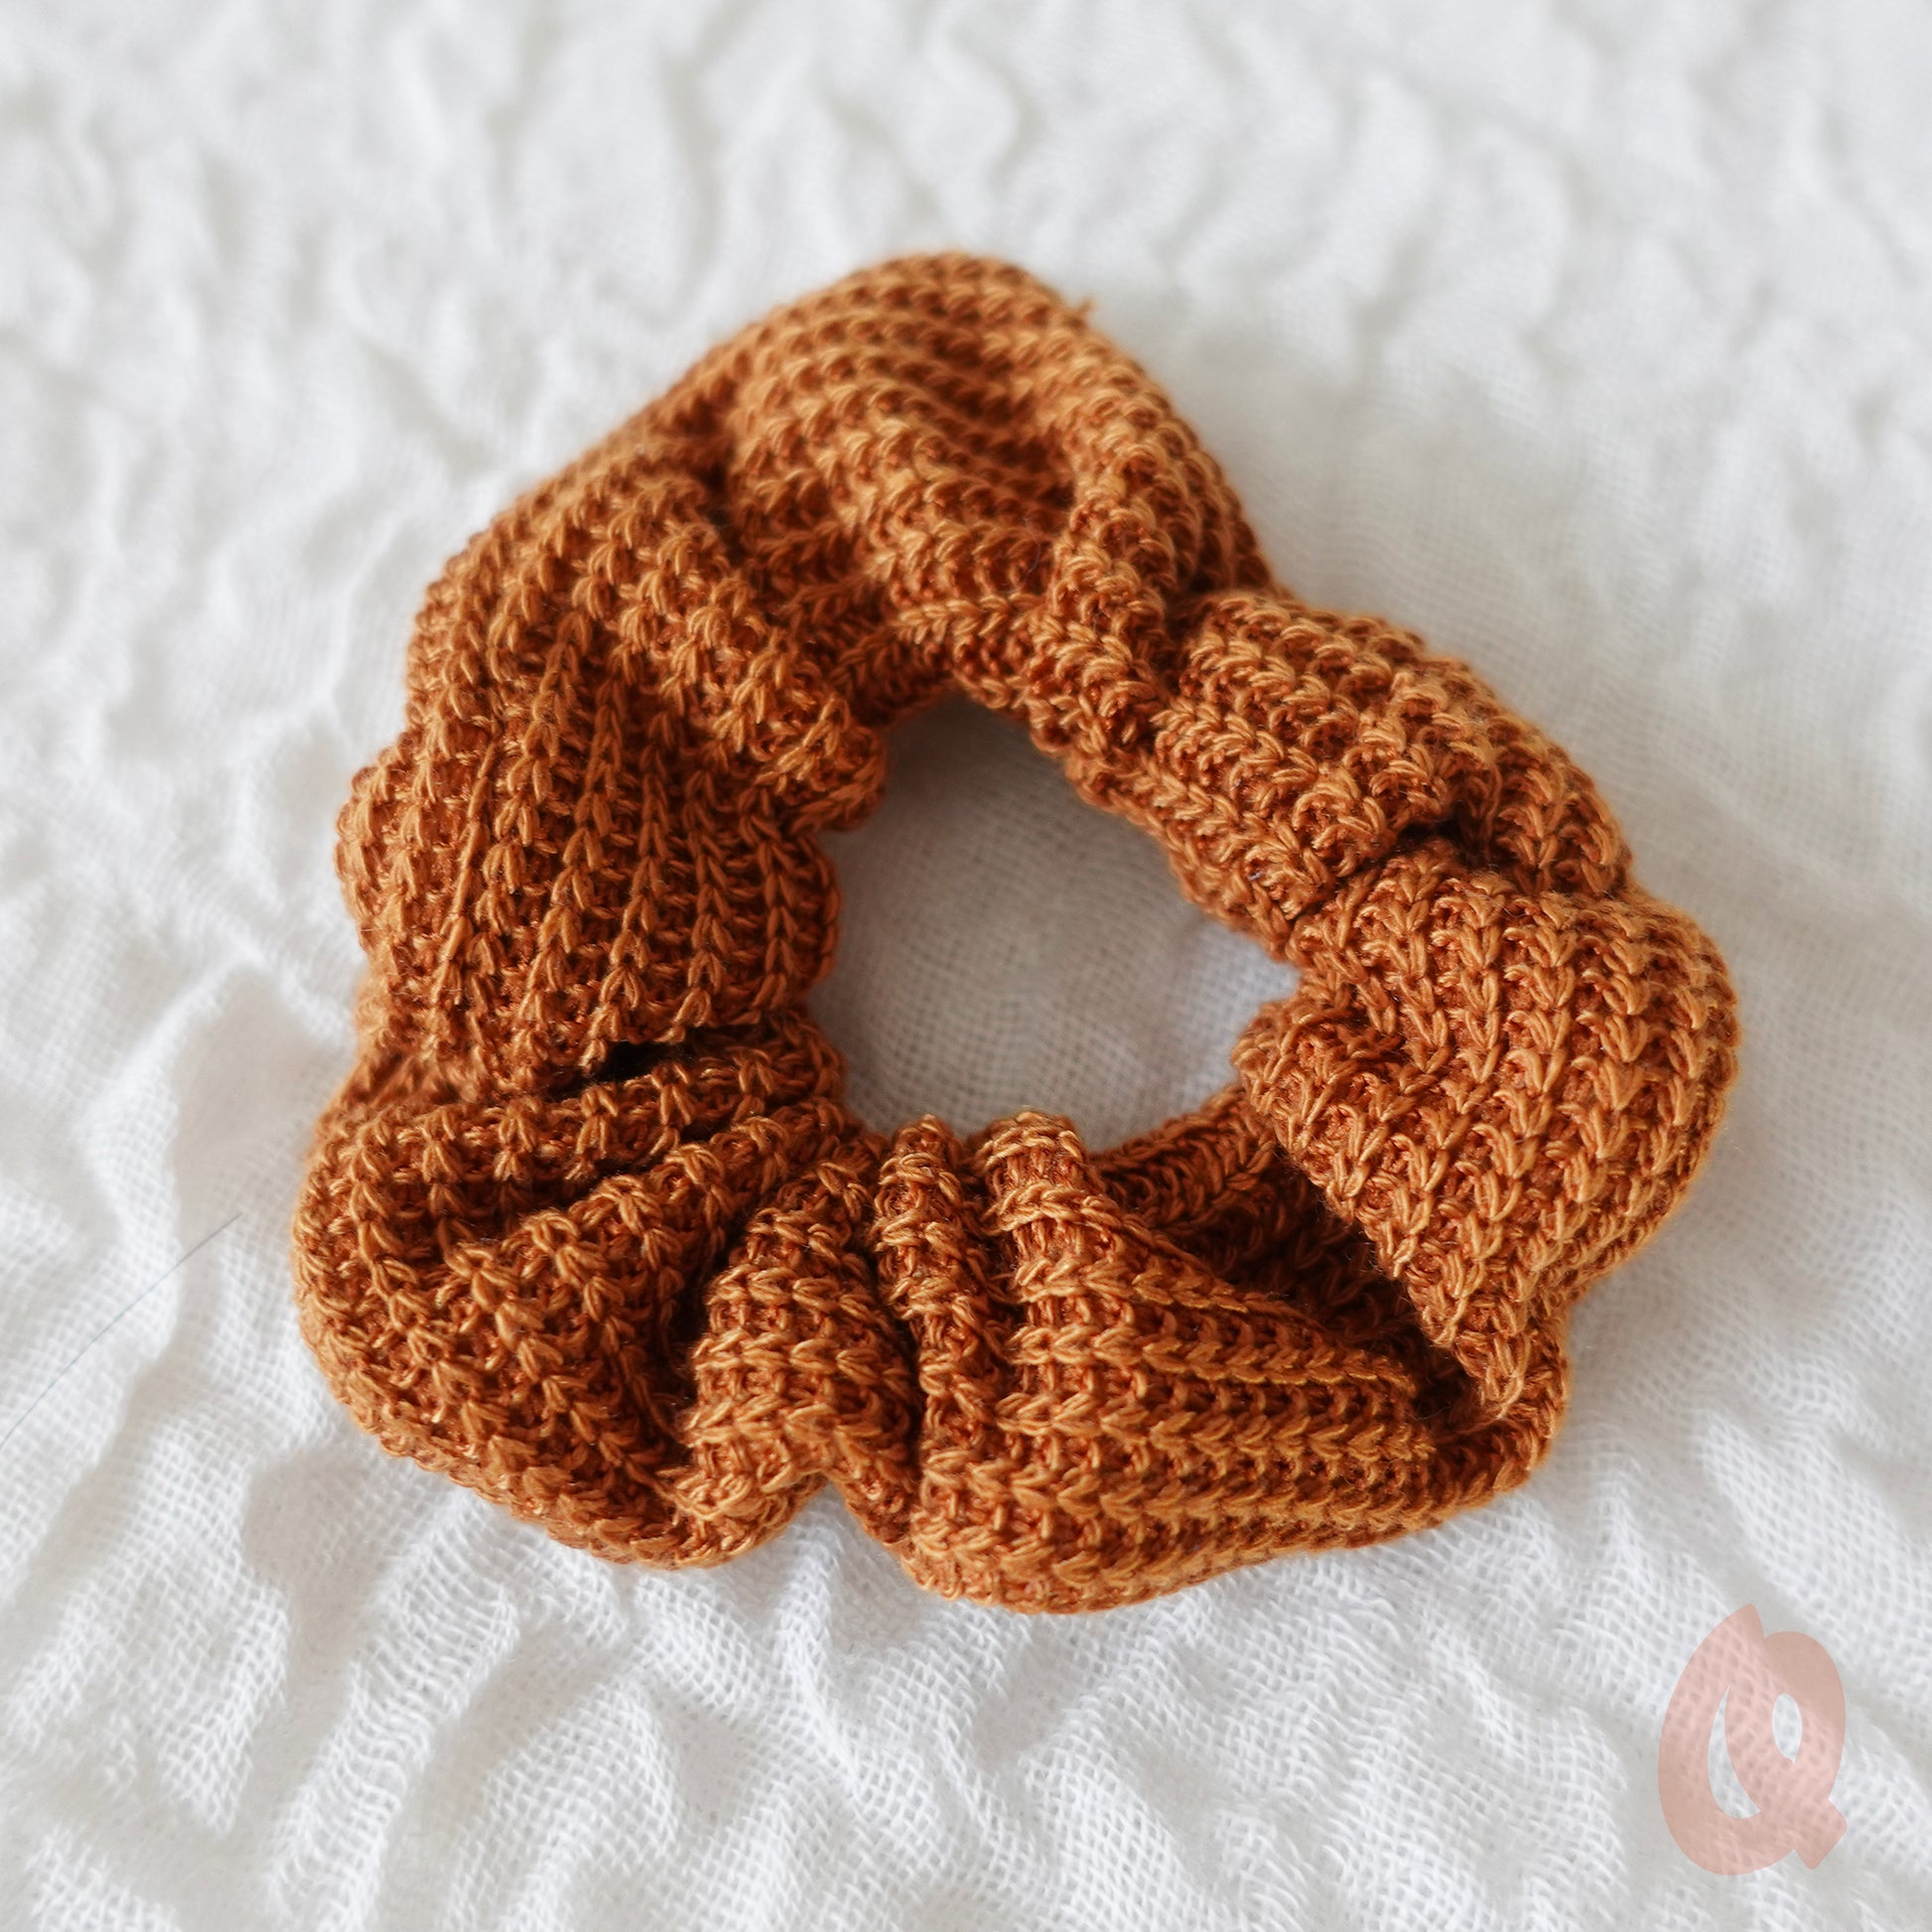 Knitted Scrunchie - Qwerky Colour